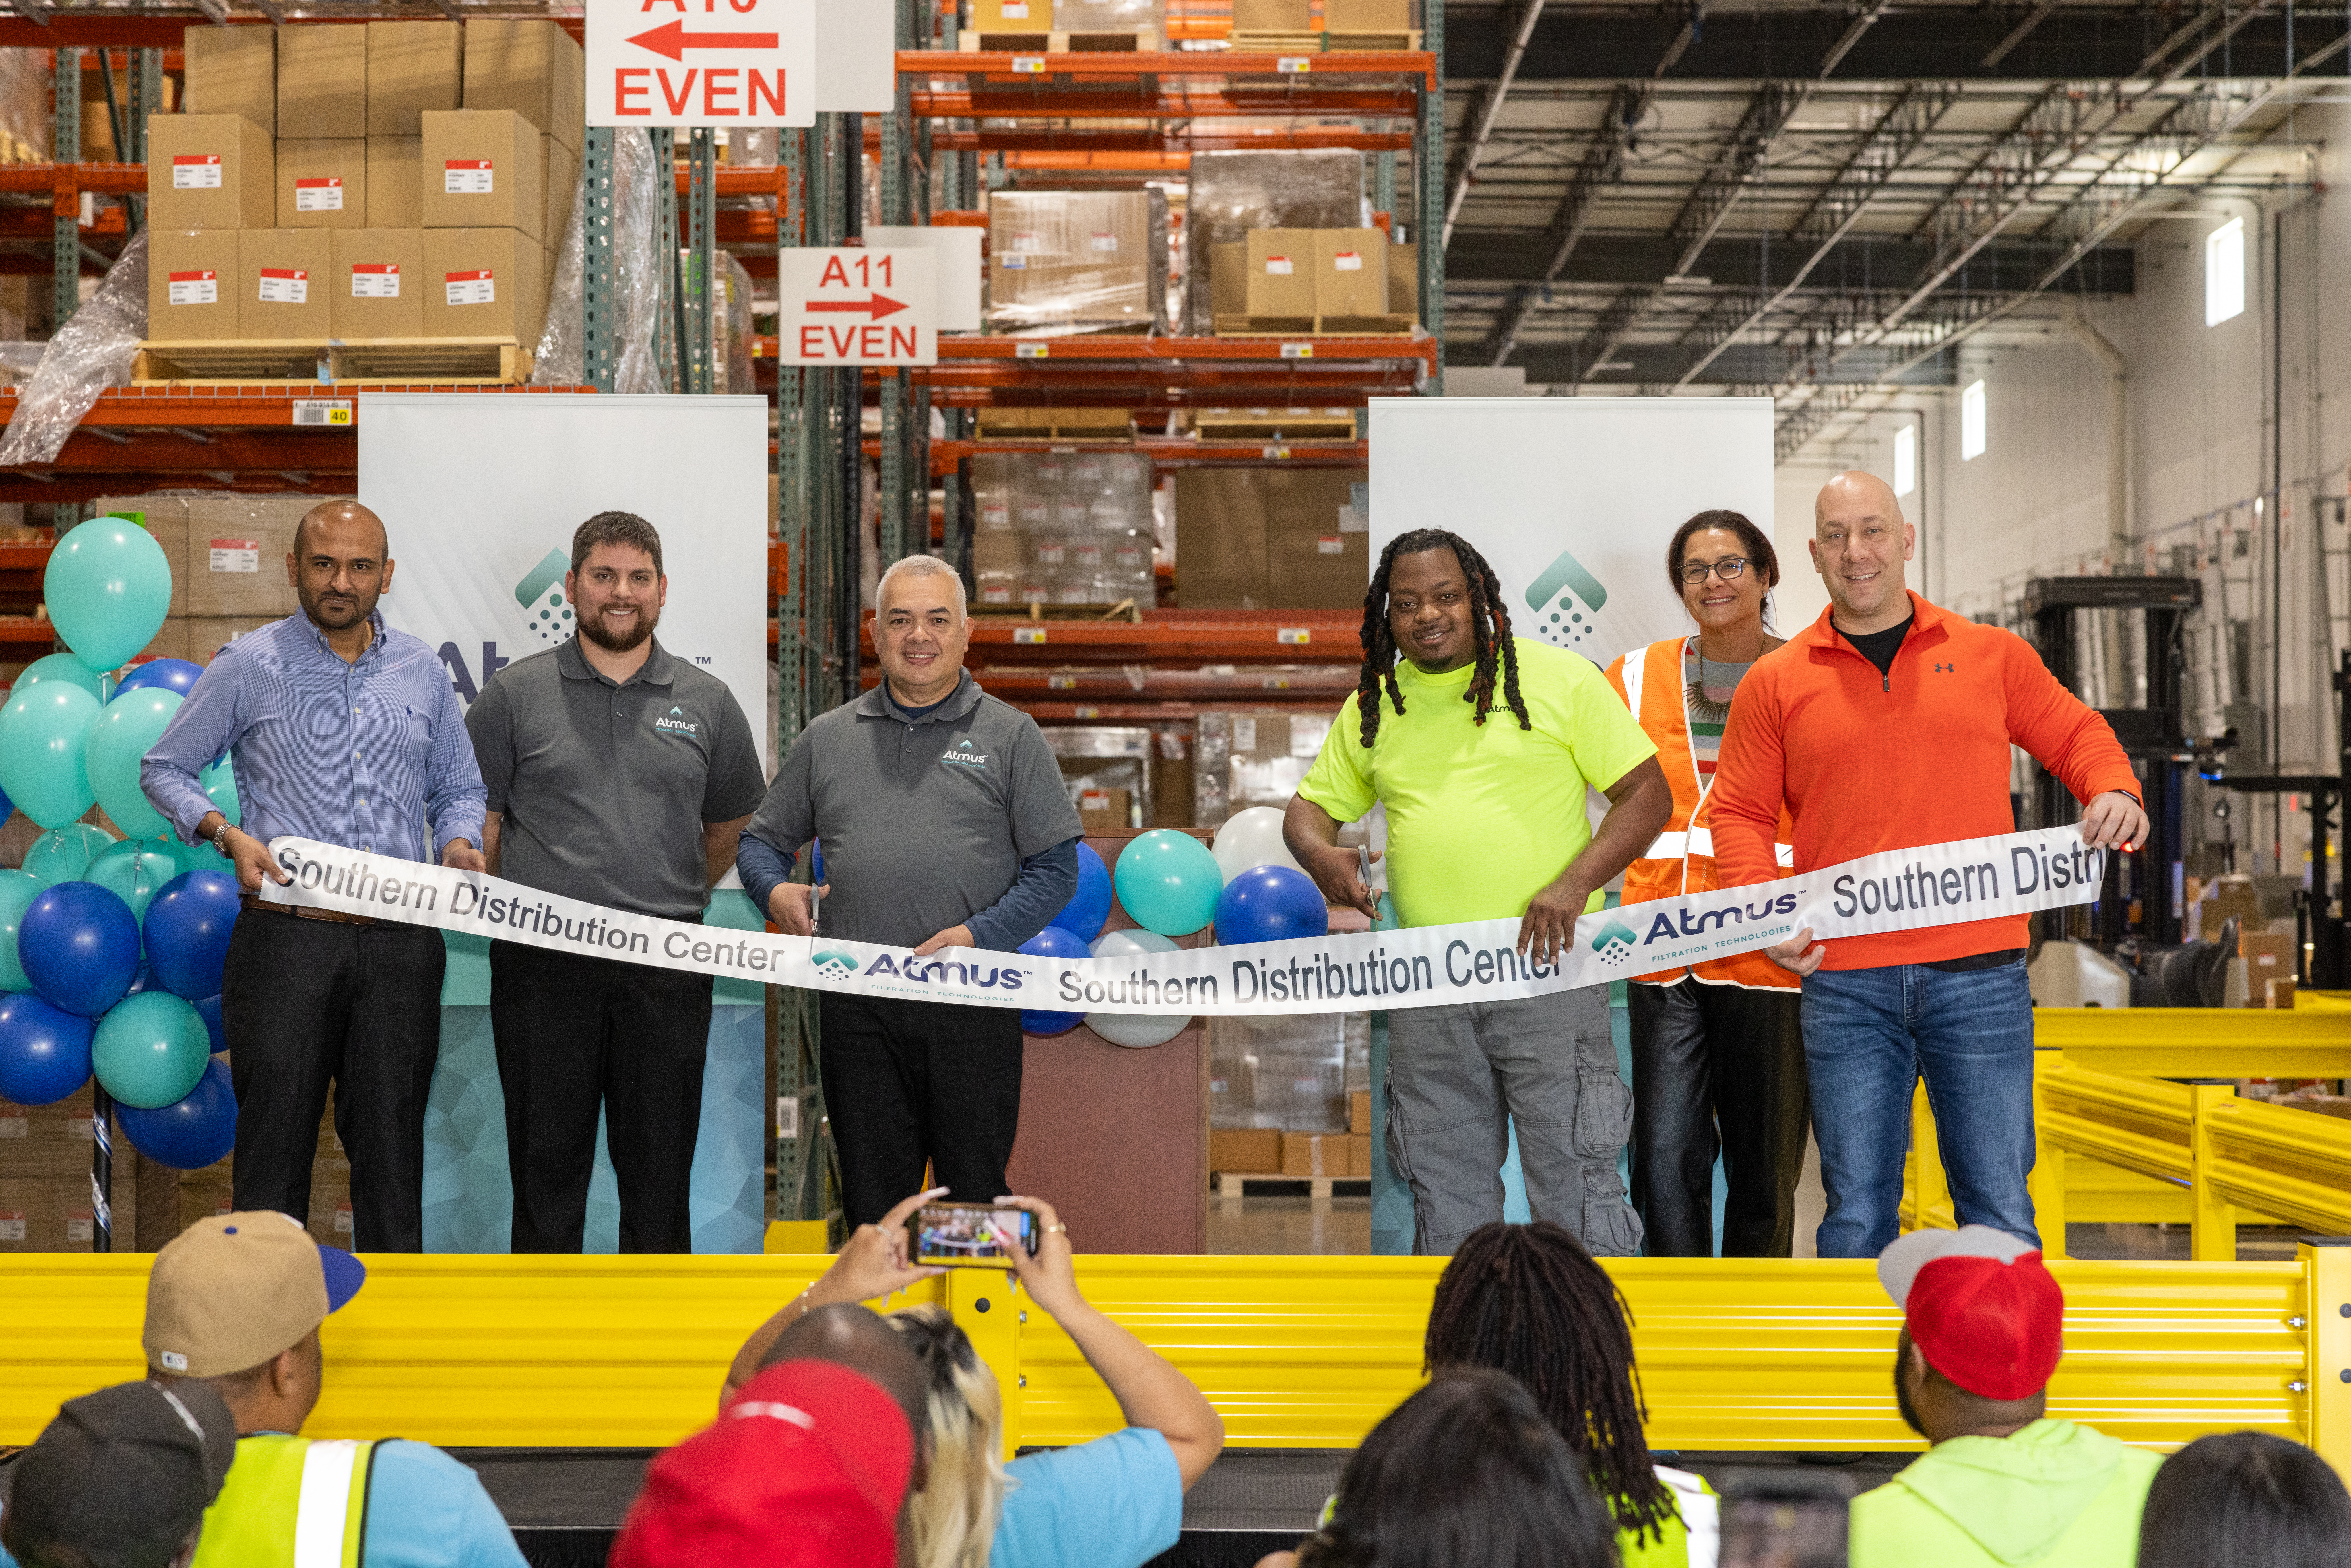 Arif Mujawar (Planning & Logistics Director), Andrew McLellan (SDC Site Leader), Mario Gomez (Warehouse Associate), LaQuintus Nash (Warehouse Associate), Hedy Groff (Executive Director, NA Aftermarket & Sales Operations) and Benjamin Smith (Regional Logistics Director) cut the ribbon to inaugurate the SDC